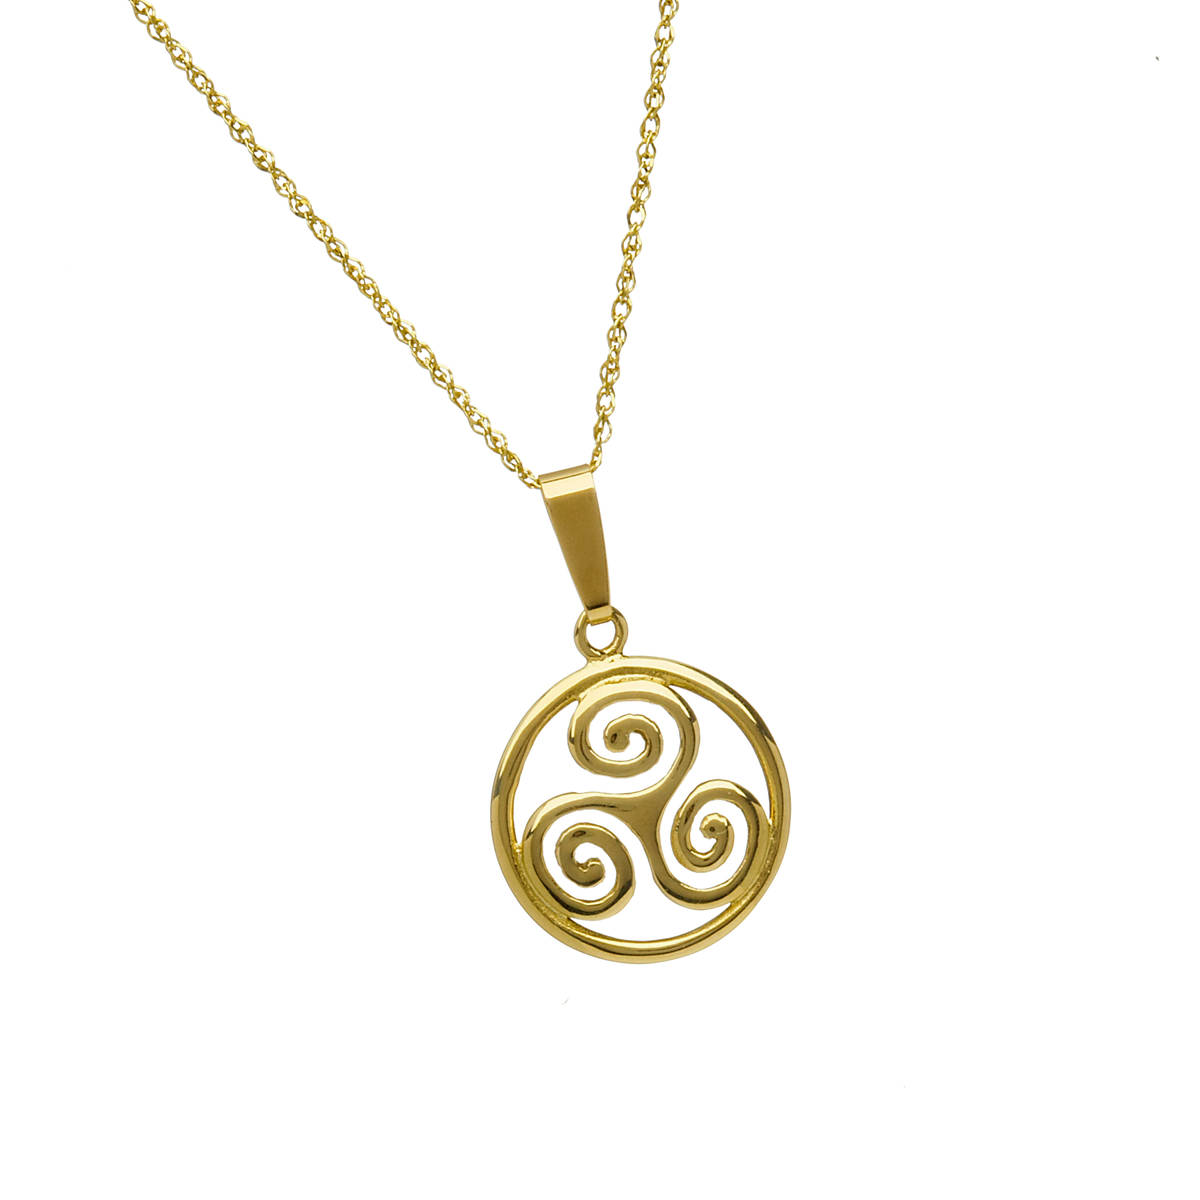 \n	10 carat yellow gold circular celtic spiral pendant on 18 inch chain.\n	This triskele design is most attractive and should you desire this piece in white or rose gold please indicate your preference in the comment box on checking out.